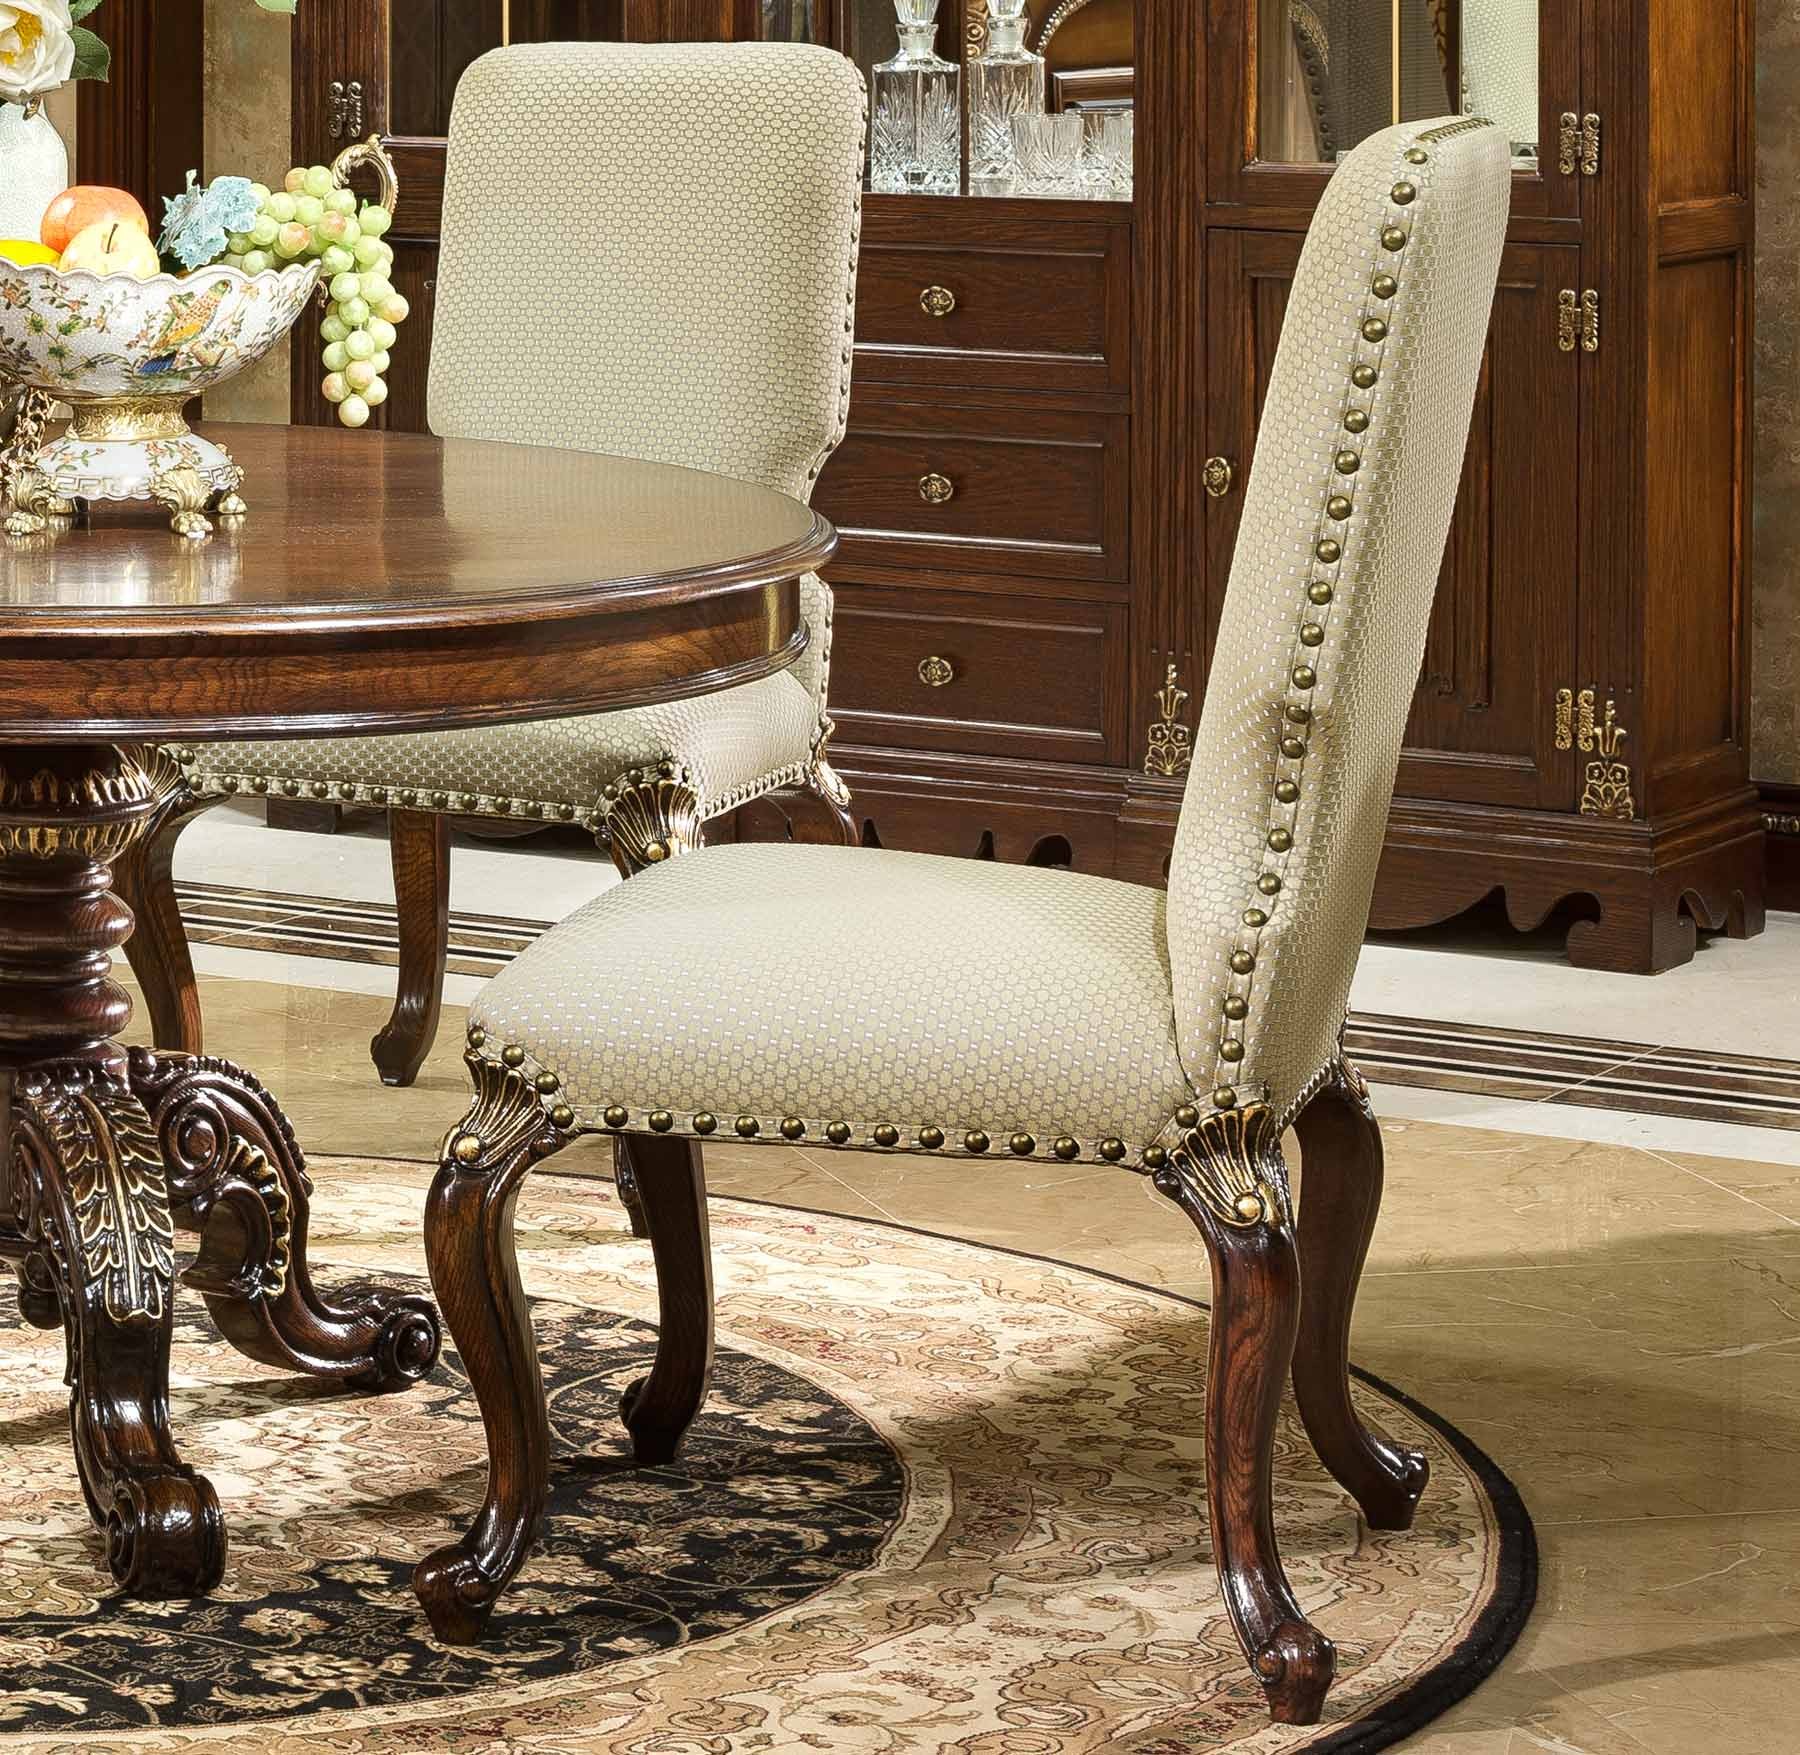 Gorsvenor Dining Chair shown in Antique Almond or Antique Cocoa finish